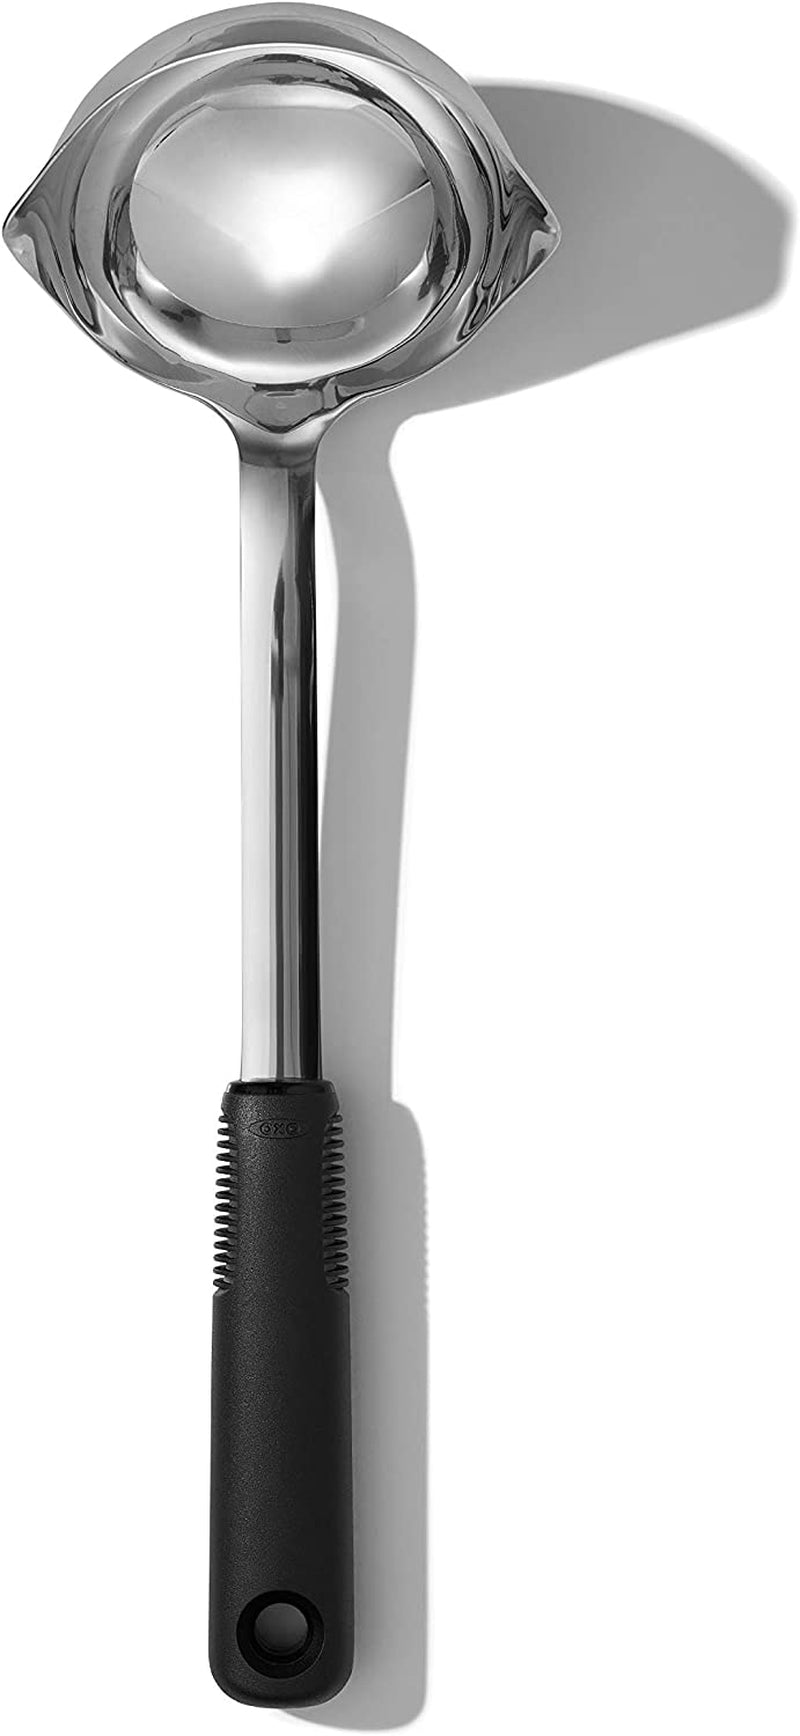 OXO Good Grips Stainless Steel Carving Fork